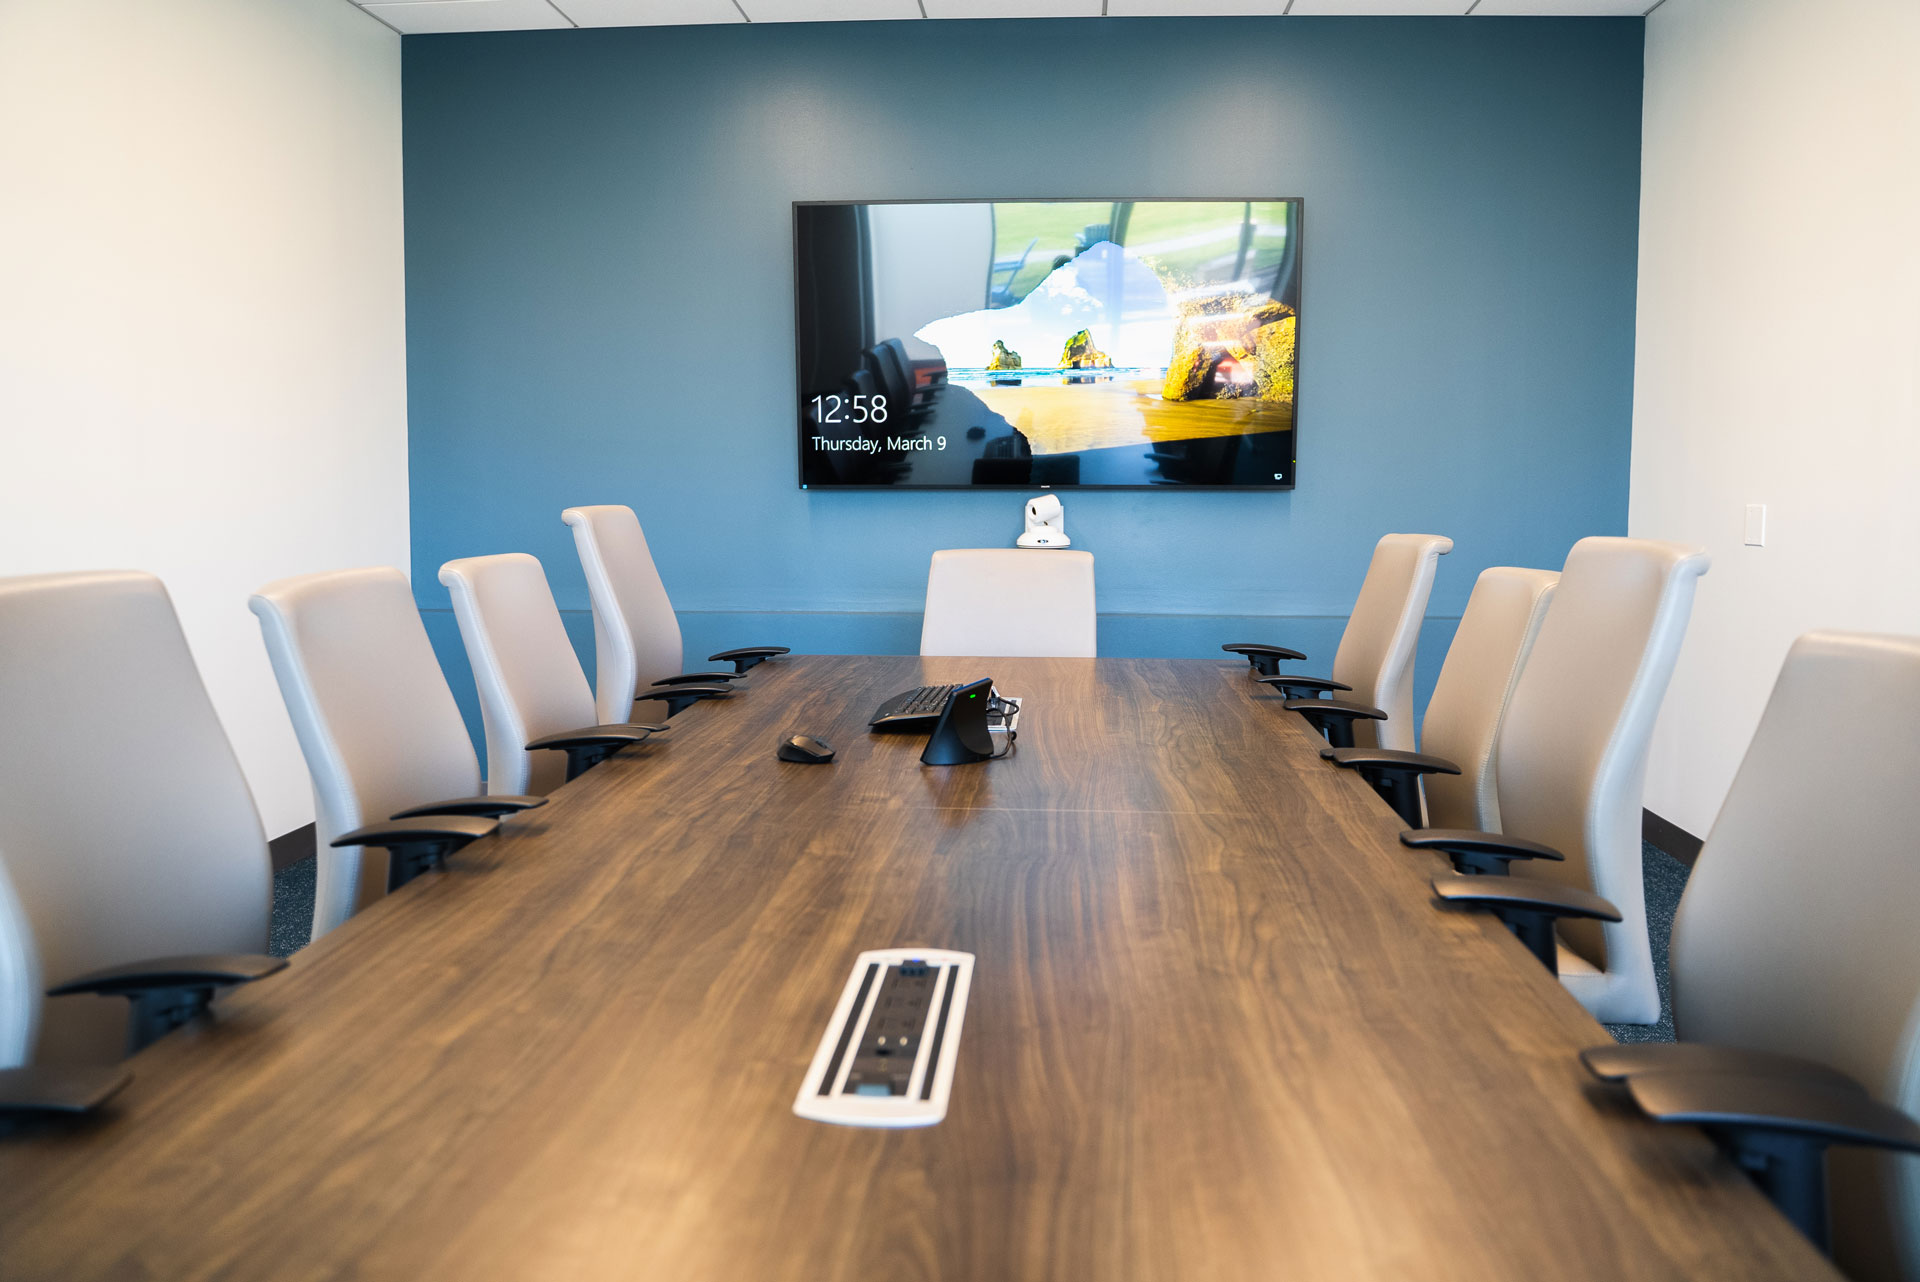 Conference room table with a monitor mounted to the wall at the other end